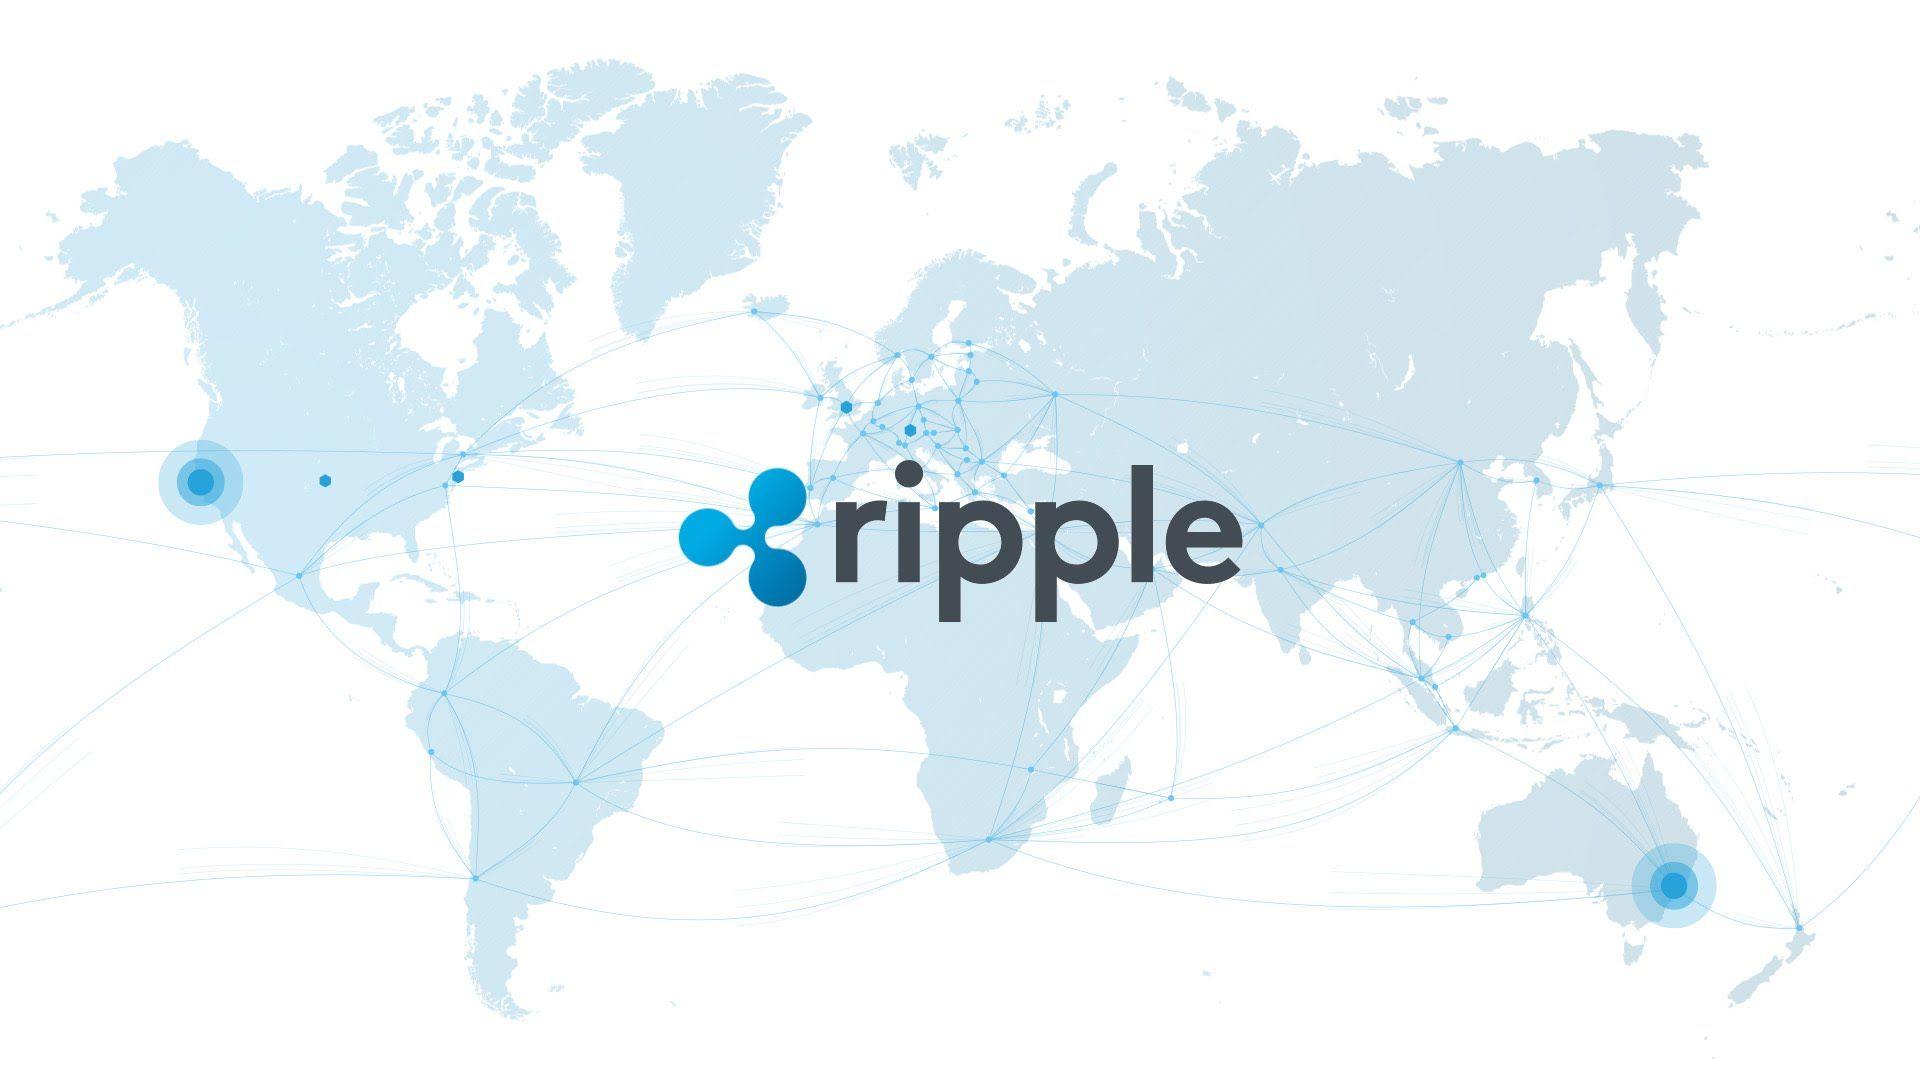 Is Ripple A Scam? ABSOLUTELY NOT!